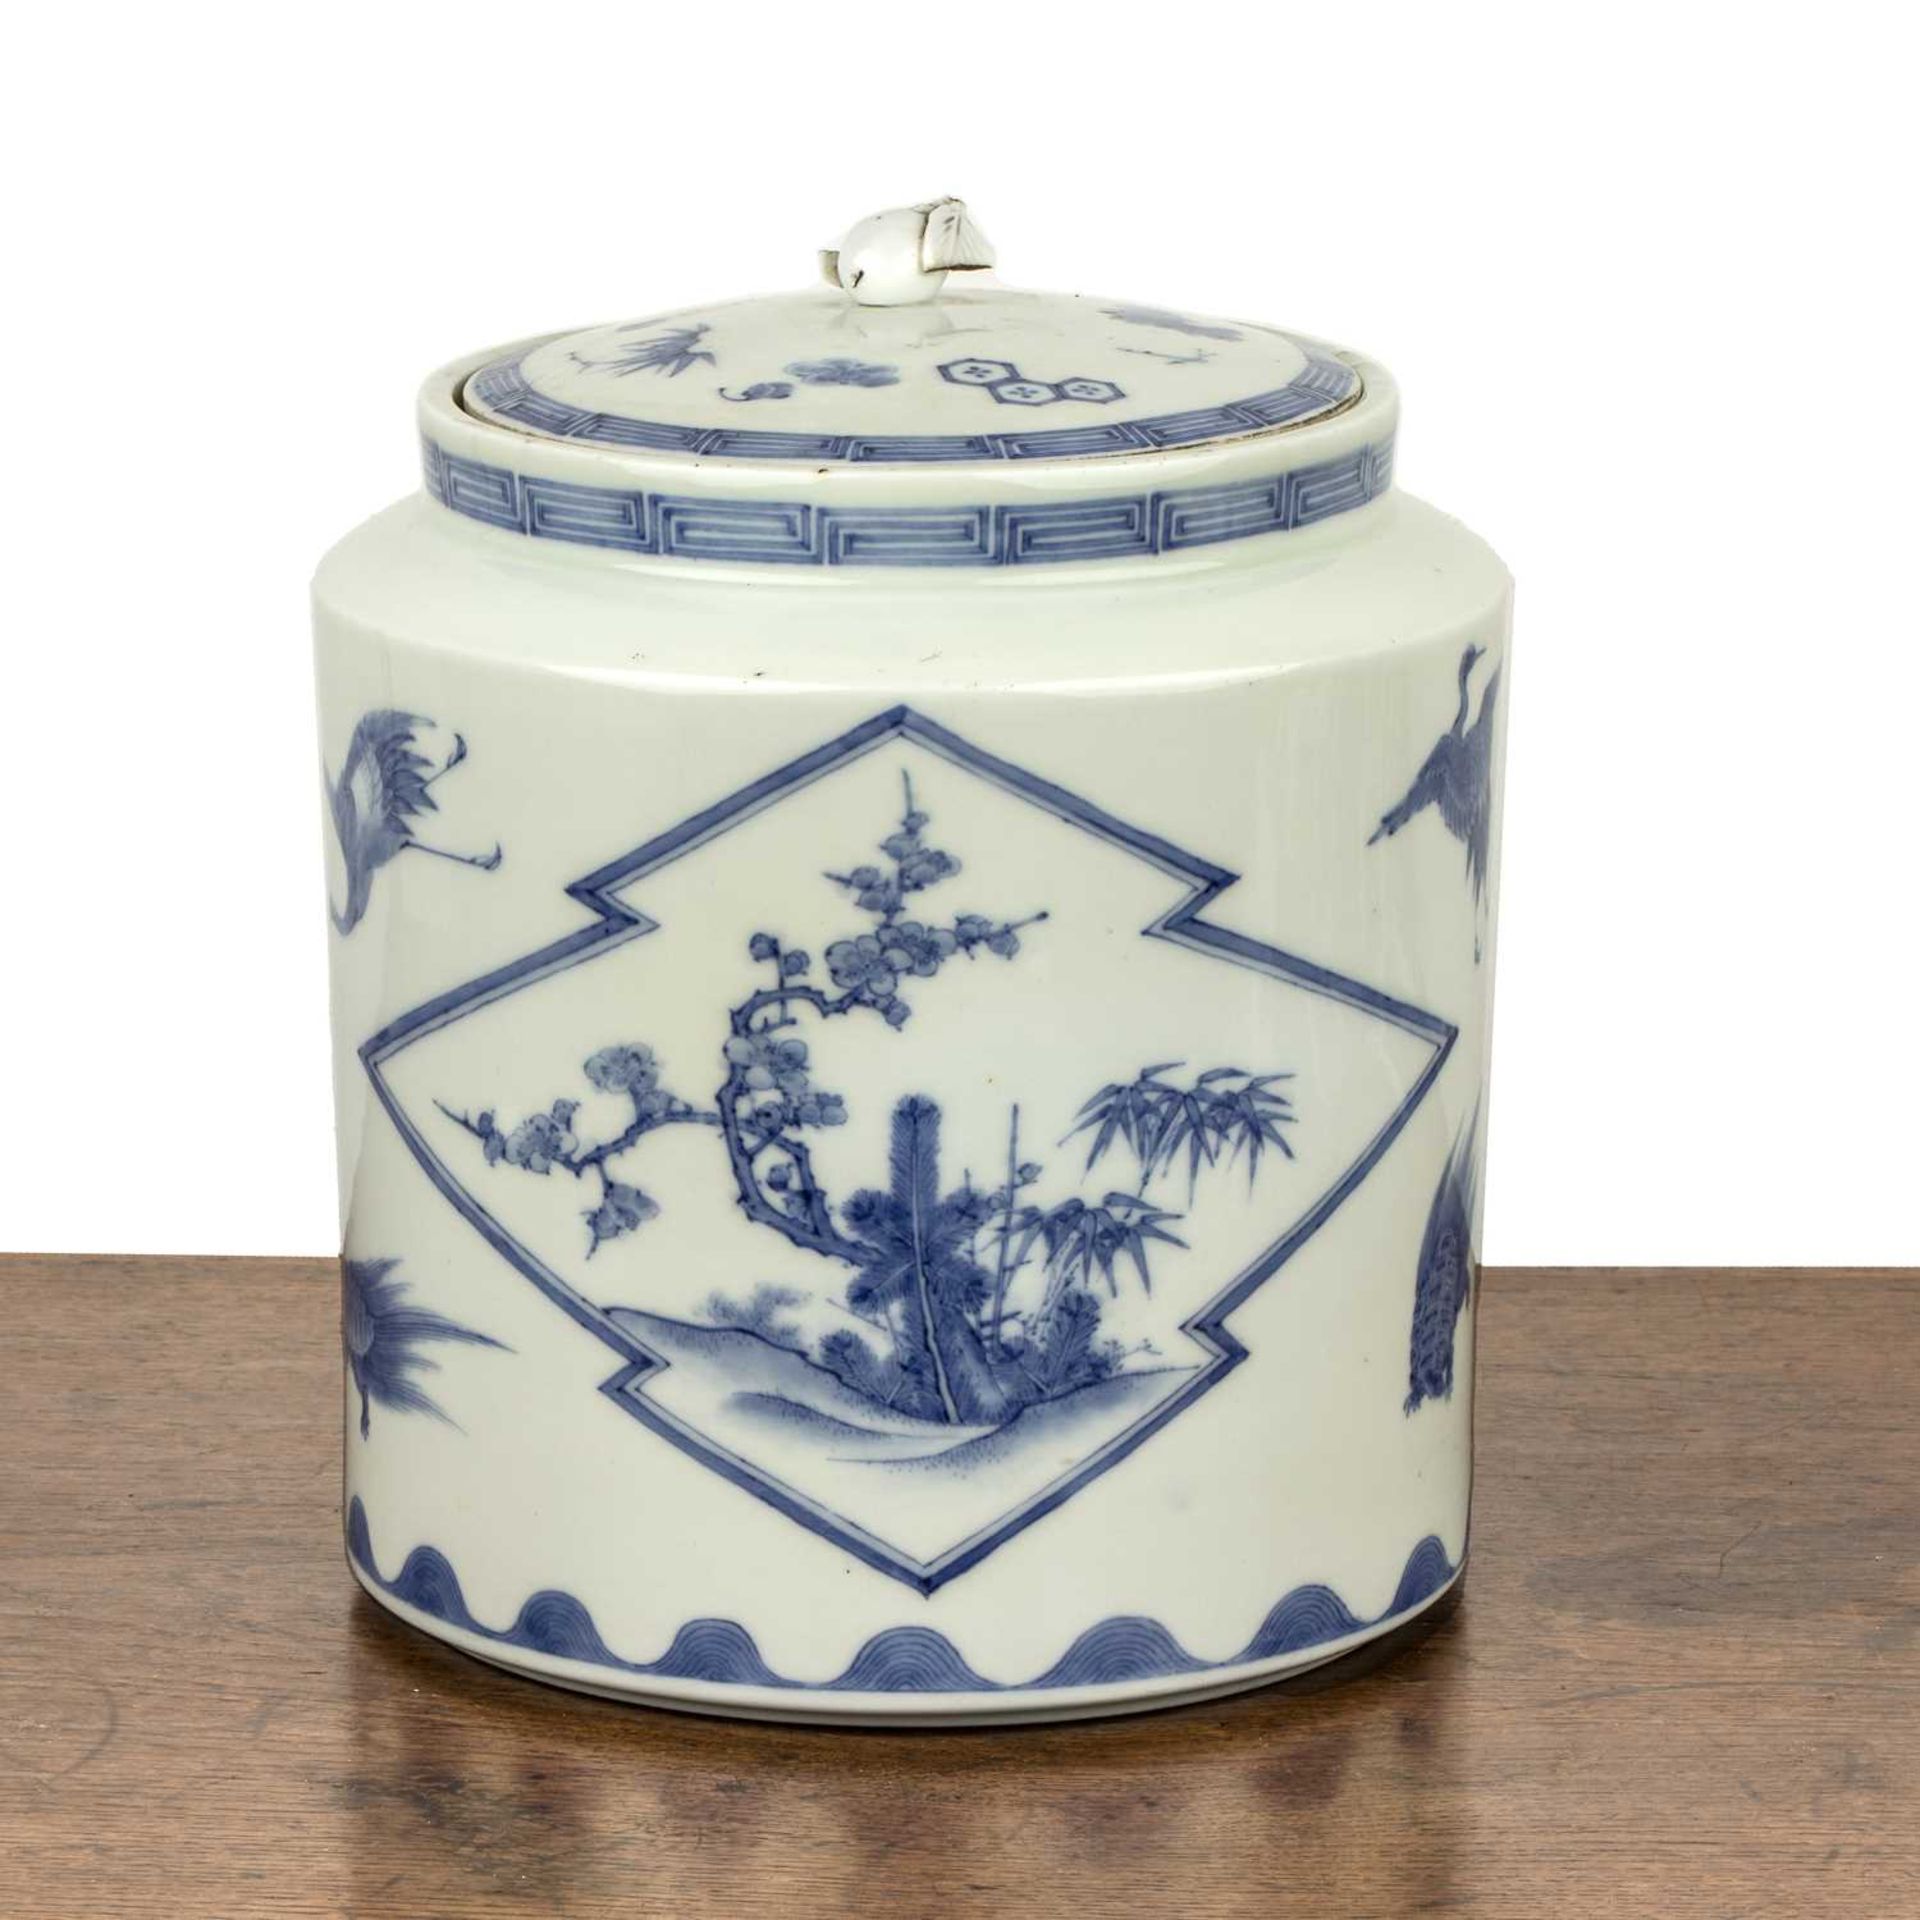 Hirado blue and white porcelain jar and cover Japanese, painted with stalks and panels of blossom - Image 2 of 4